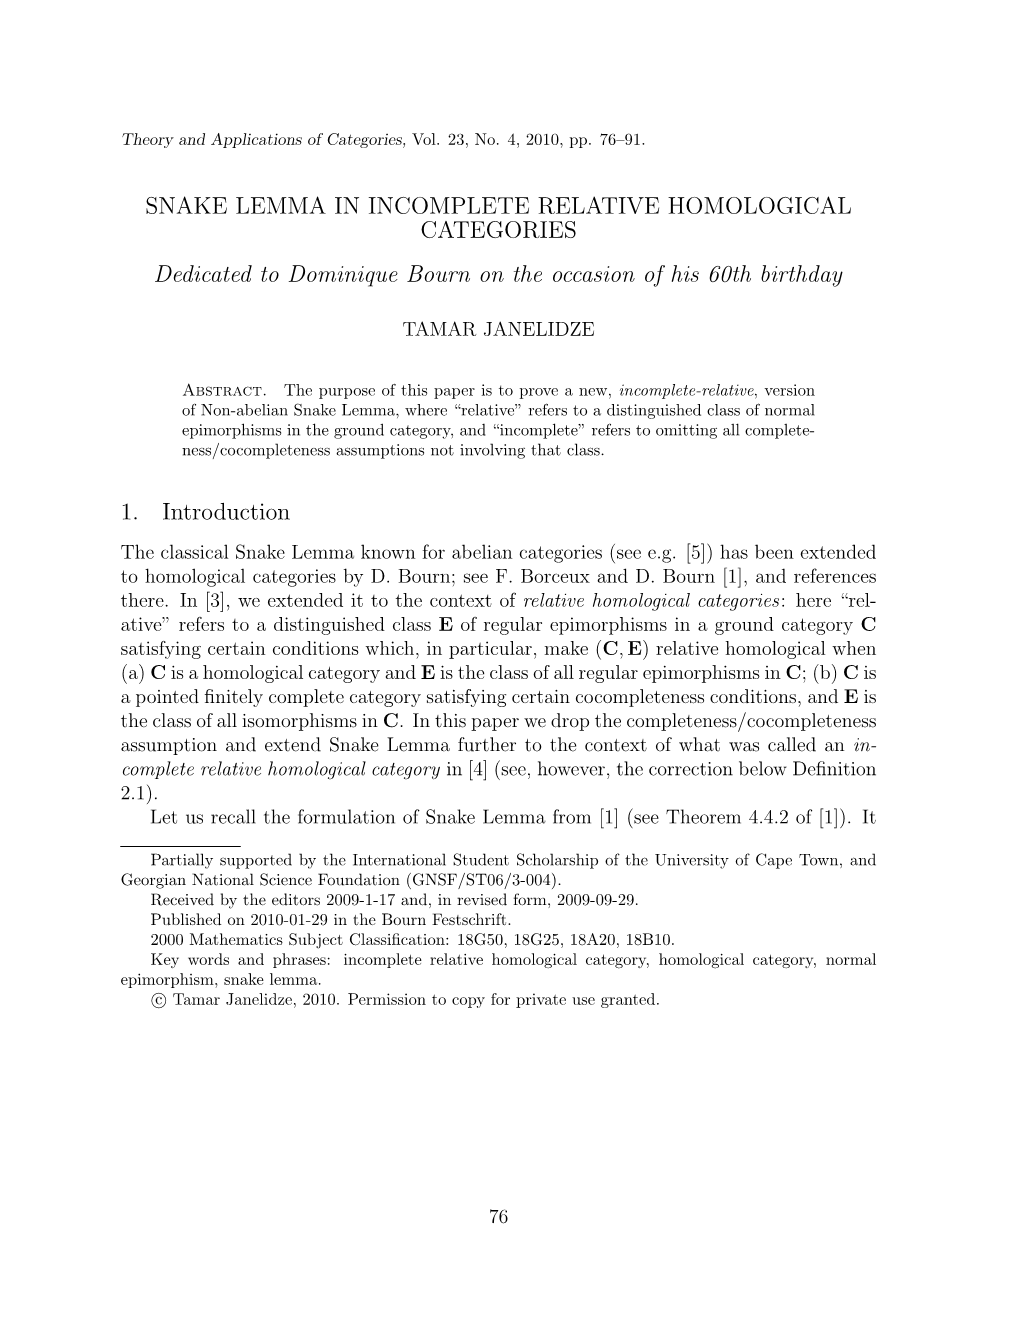 SNAKE LEMMA in INCOMPLETE RELATIVE HOMOLOGICAL CATEGORIES Dedicated to Dominique Bourn on the Occasion of His 60Th Birthday